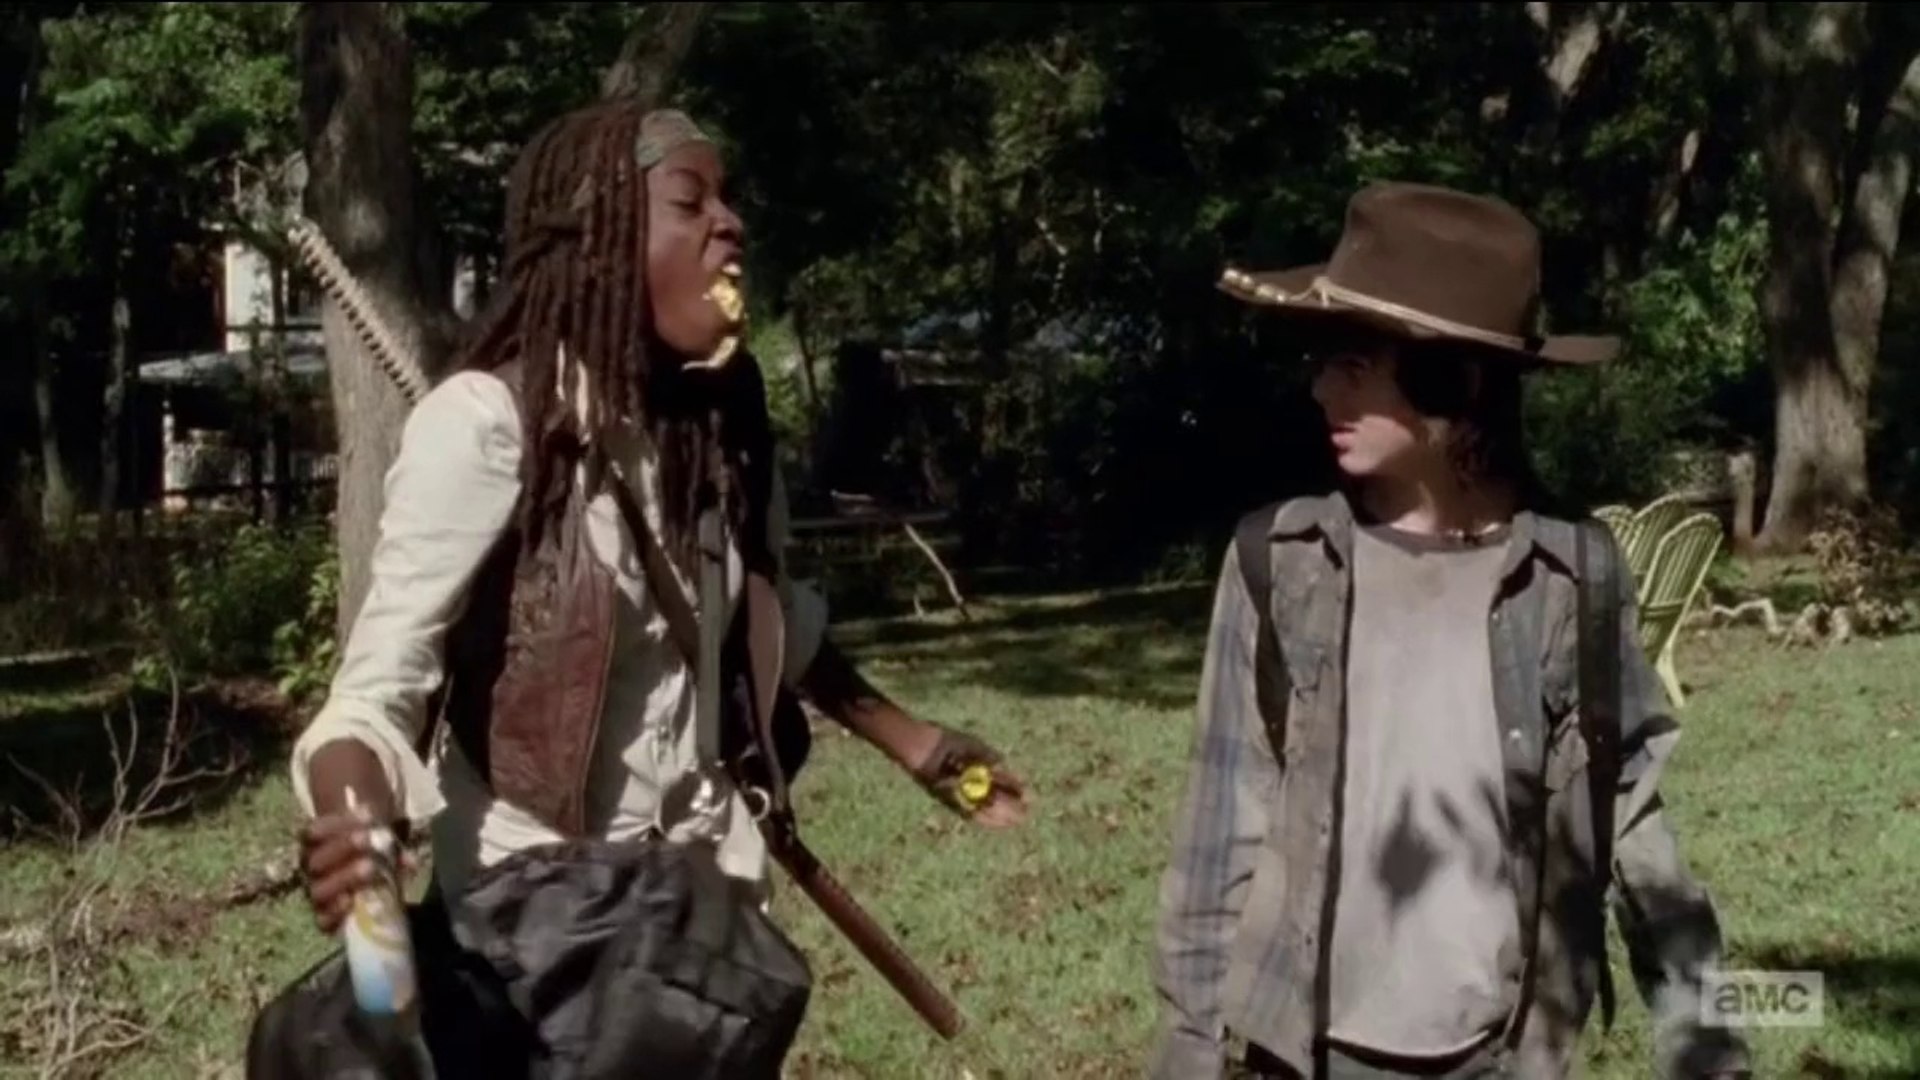 THE WALKING DEAD carl & michonne happy moments - video Dailymotion